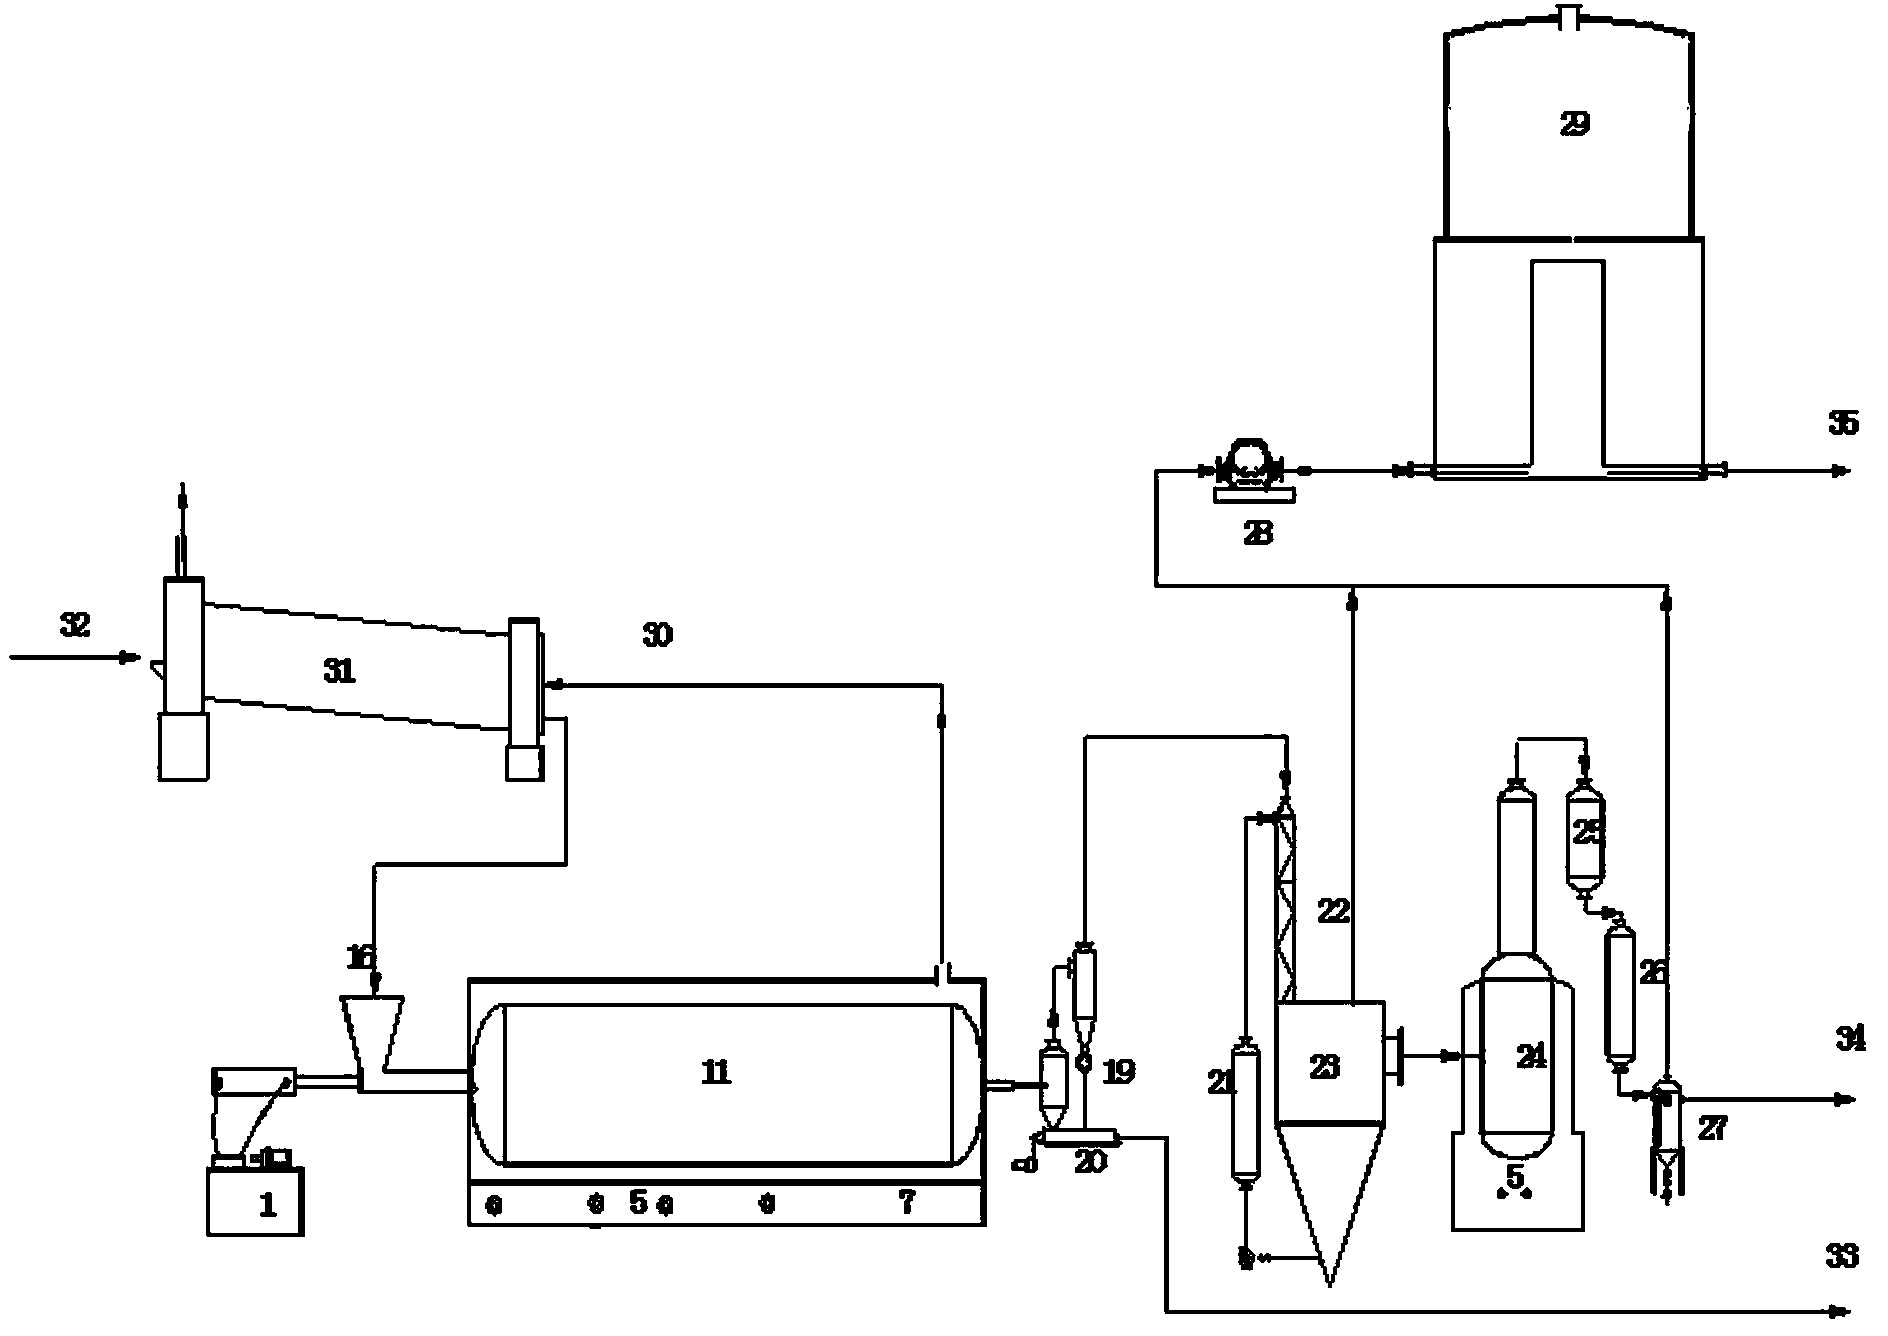 Process for producing fuel oil by thermal cracking of biomass